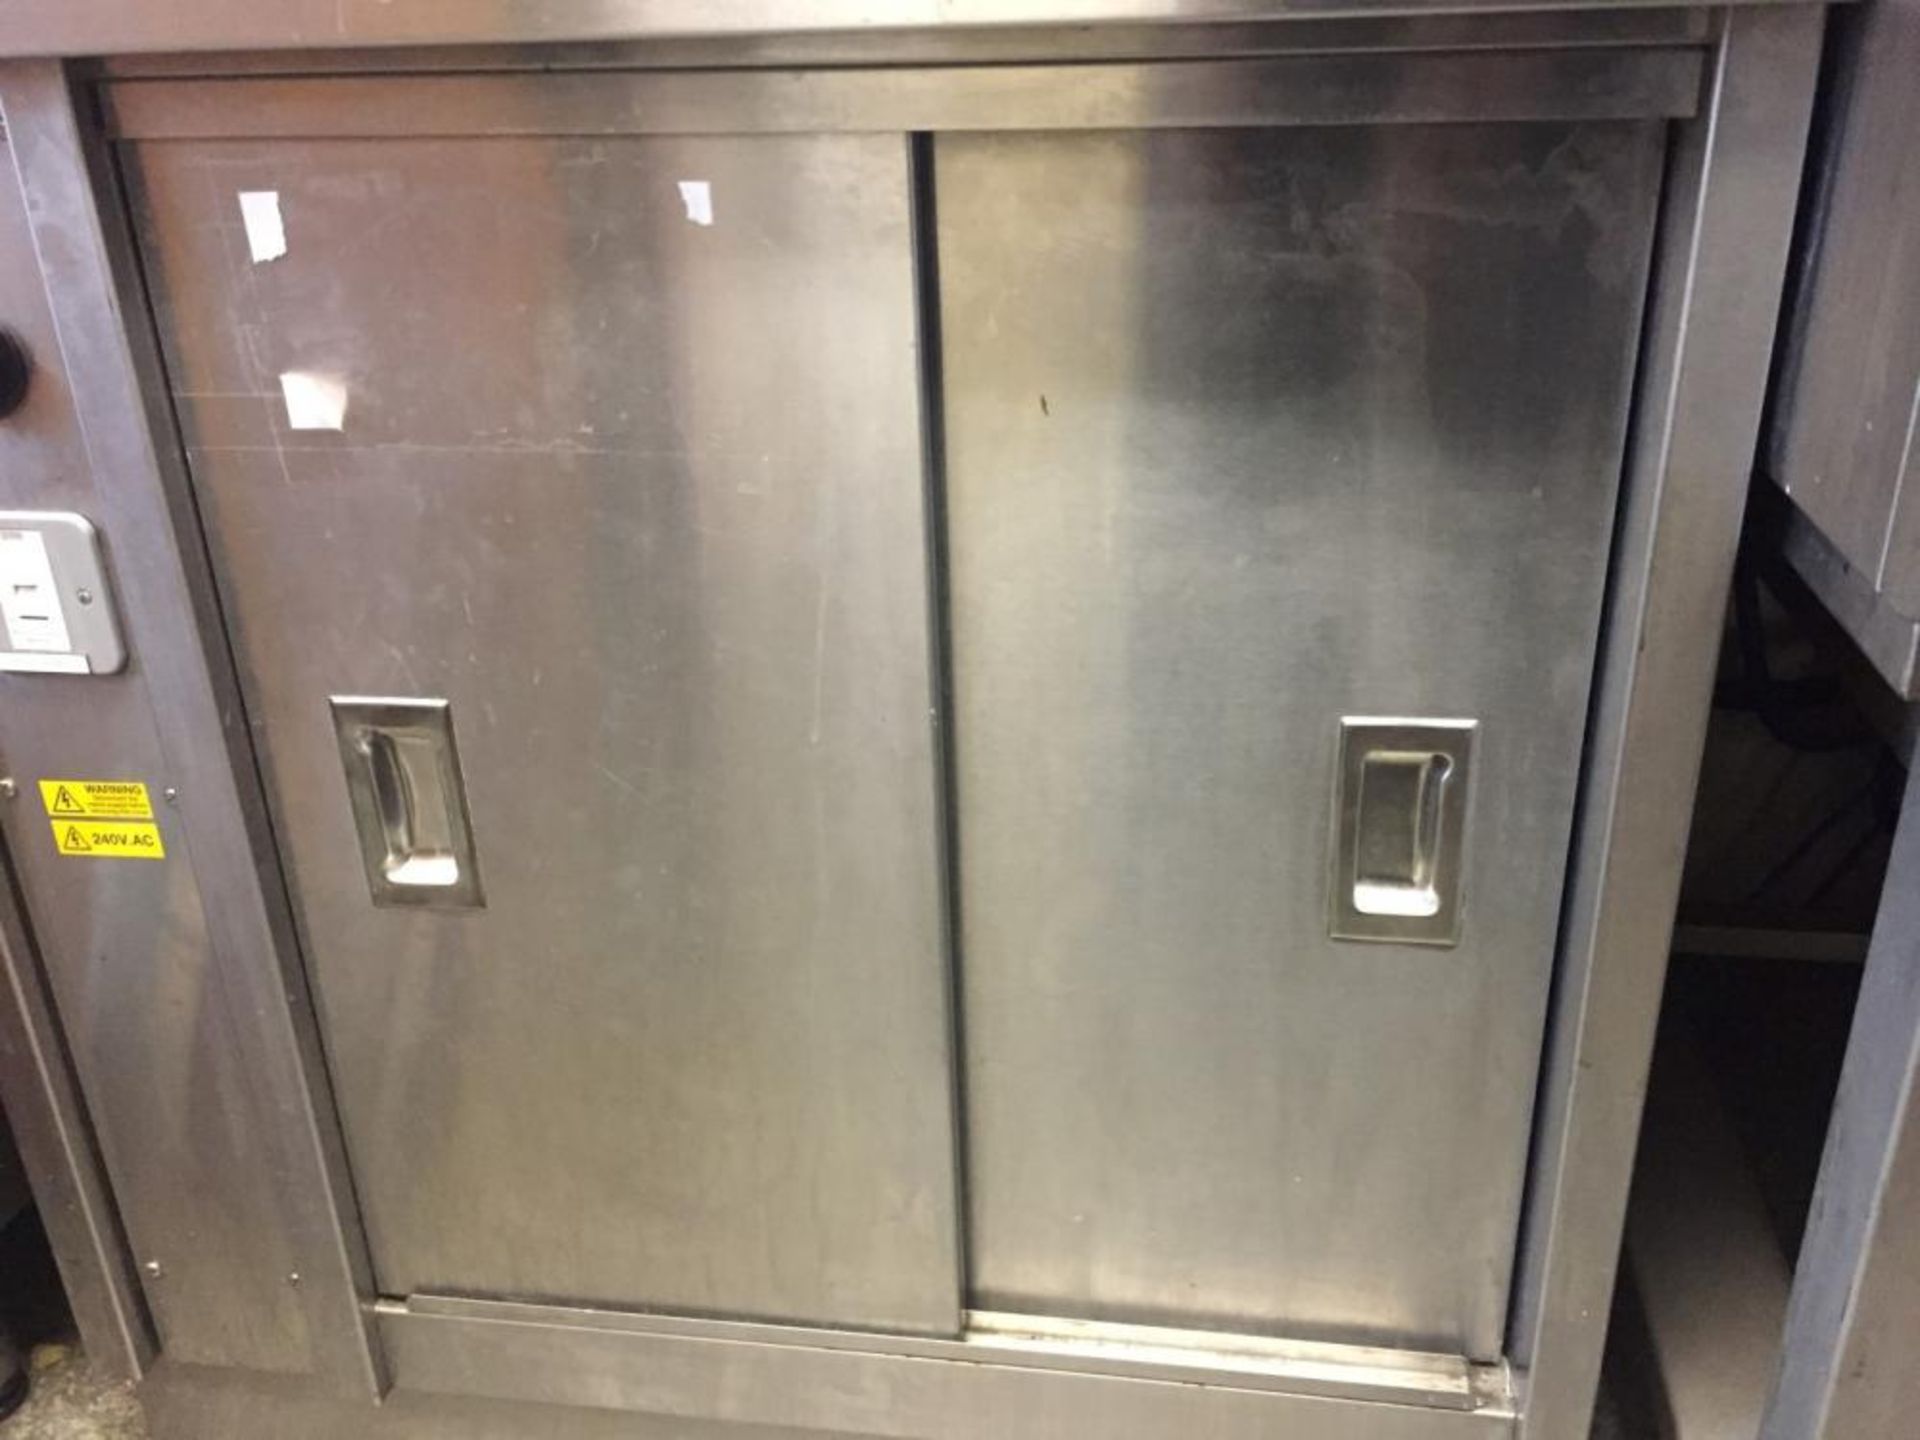 1 x Stainless Steel Commercial Hot Cupboard - Dimensions: W90 x D55 x H90cm - CL191 - Location: Leed - Image 2 of 5